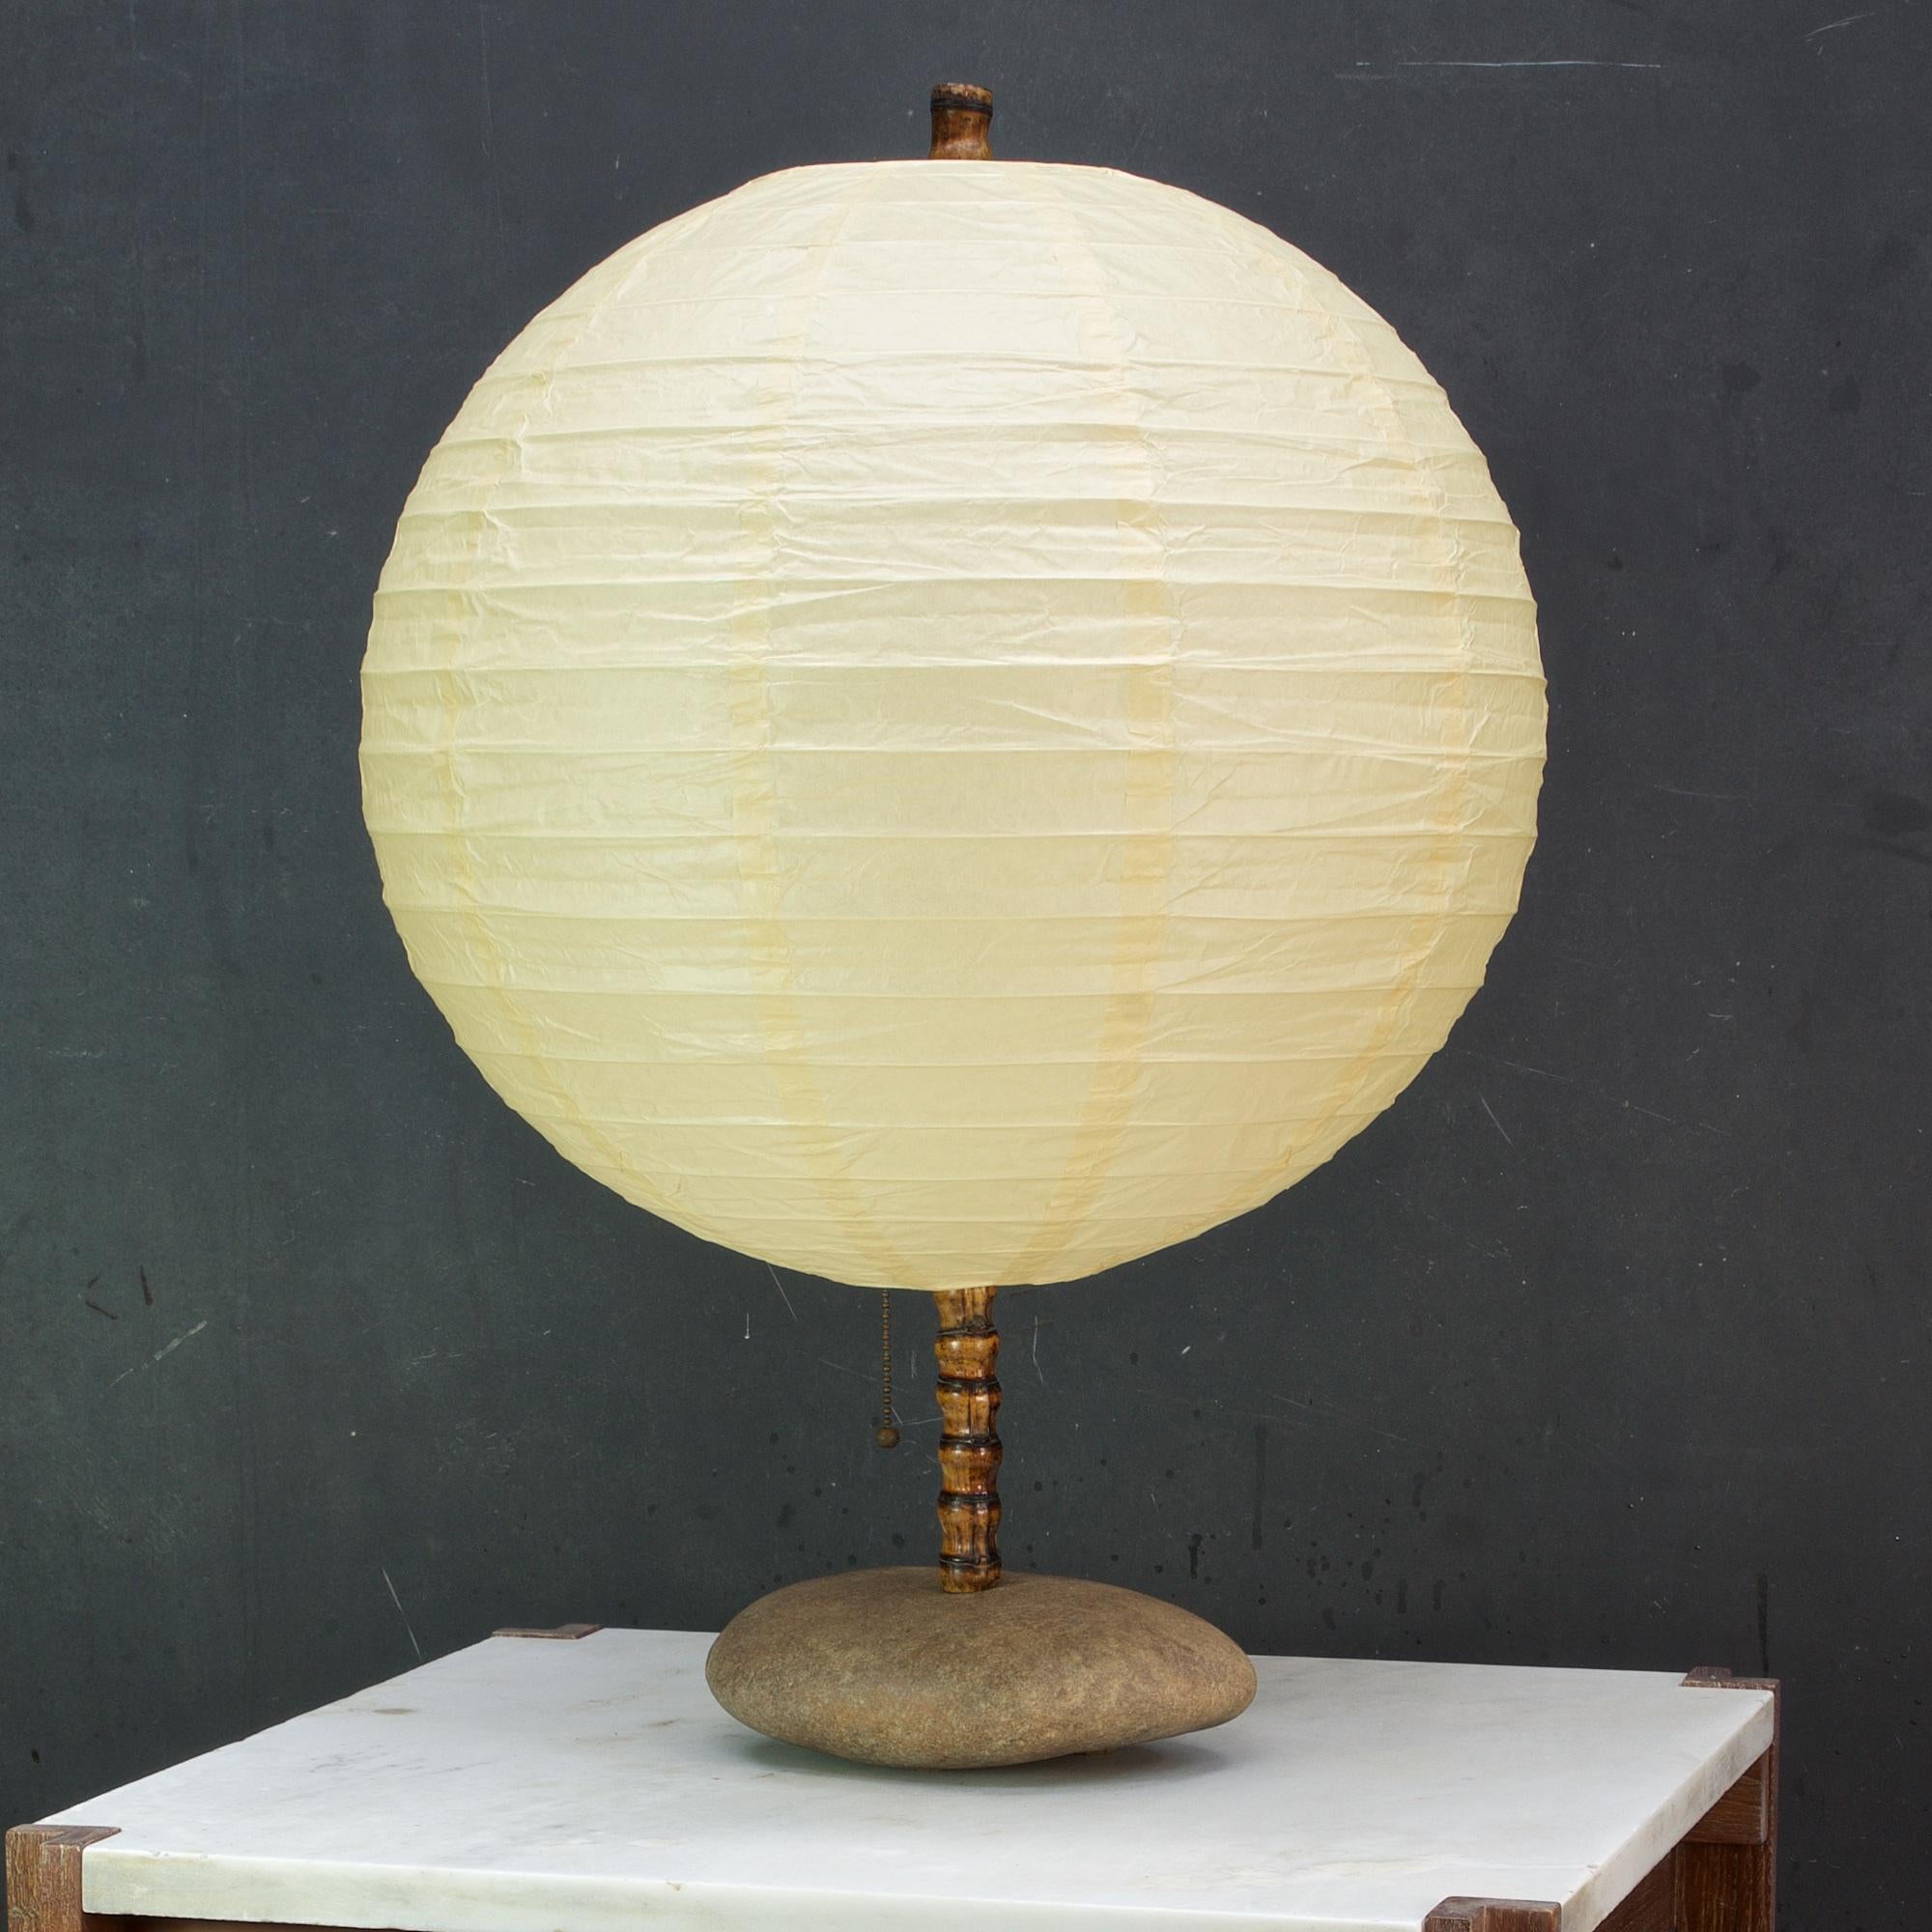 Assembled with vintage 1950s parts, but lamp shade is just 5 years old. Measures: Stone body 8.5 x 6.5 in.